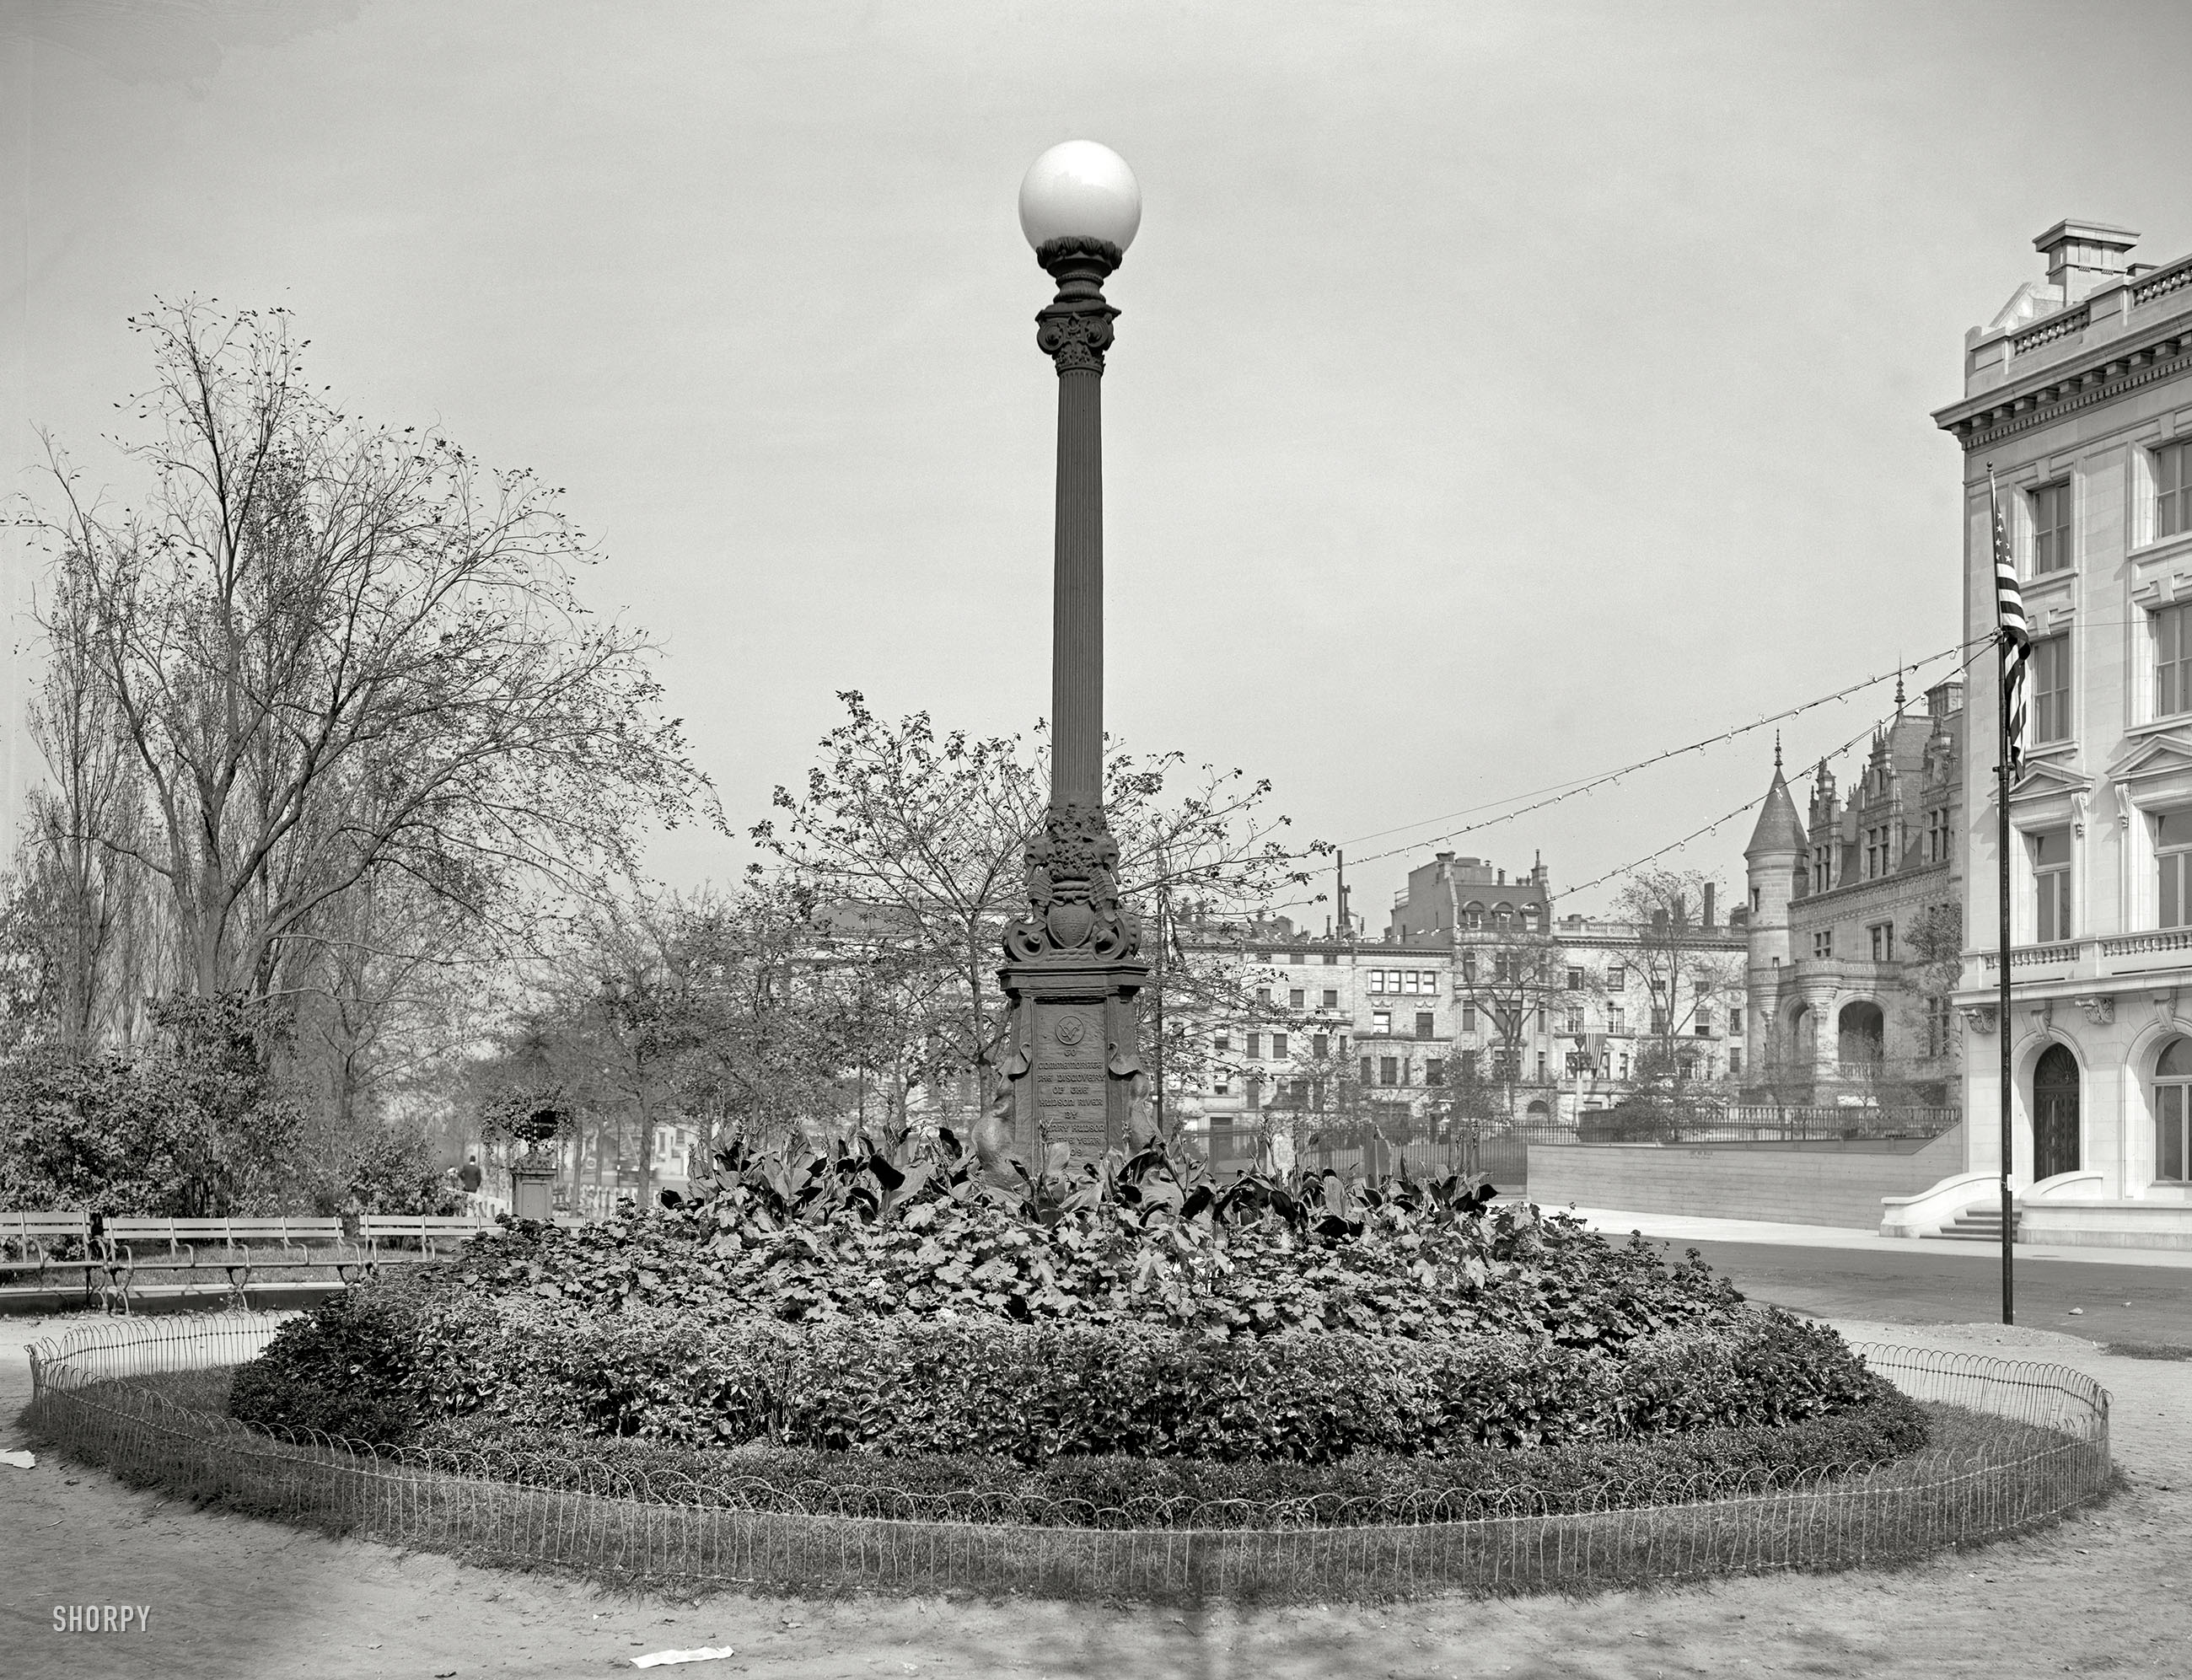 Circa 1909. "Henry Hudson Monument, Riverside Drive, New York." Memorial to the ill-fated discoverer of the Hudson River, Hudson Bay and electric streetlight. 8x10 inch glass negative, Detroit Publishing Company. View full size.